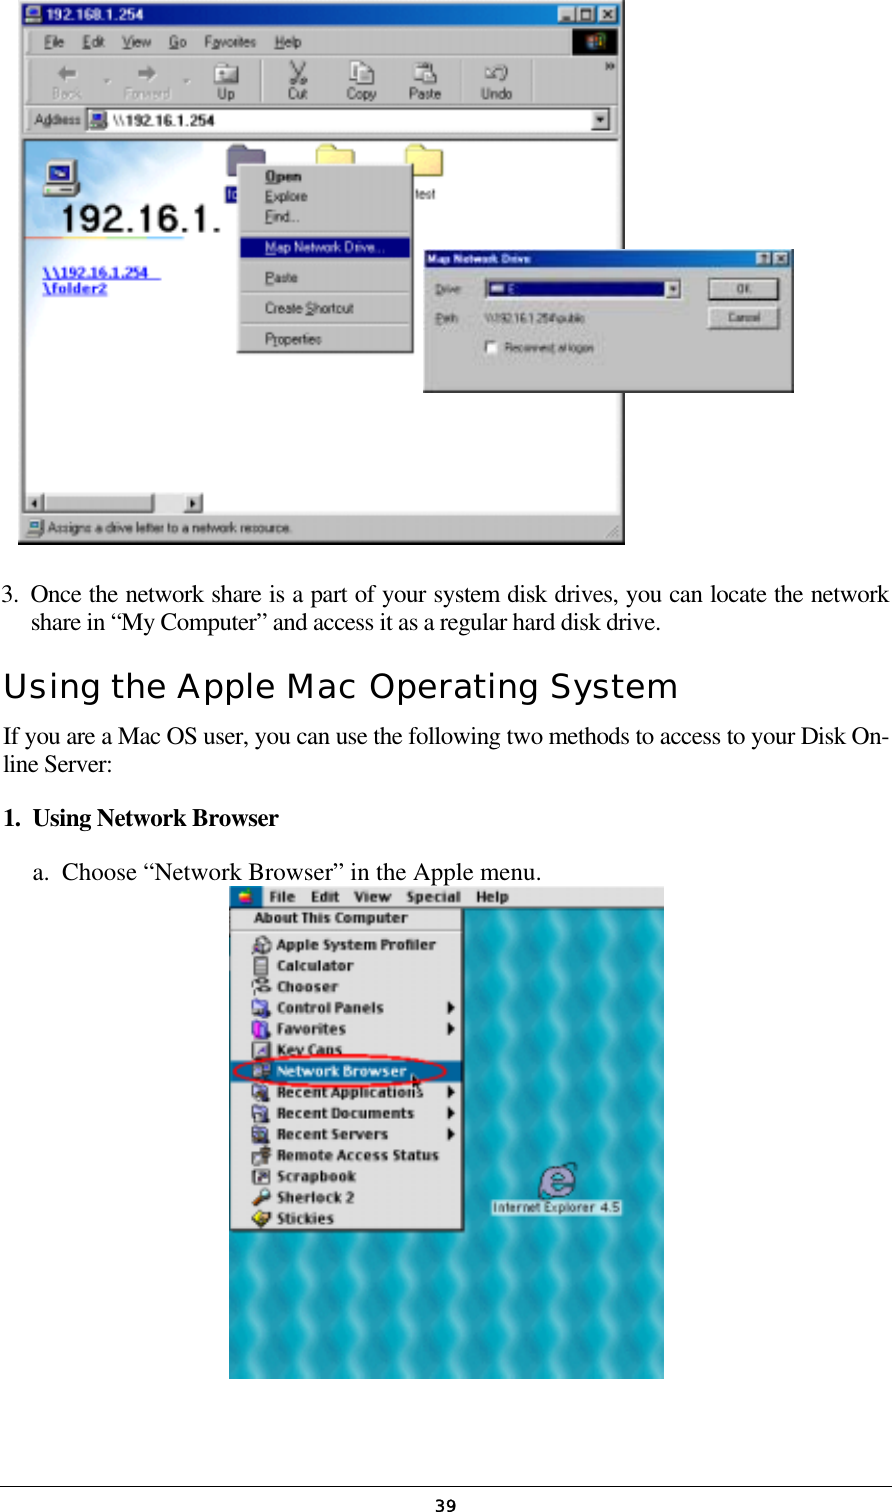   39           3.  Once the network share is a part of your system disk drives, you can locate the network share in “My Computer” and access it as a regular hard disk drive. Using the Apple Mac Operating System  If you are a Mac OS user, you can use the following two methods to access to your Disk On-line Server: 1.  Using Network Browser a.  Choose “Network Browser” in the Apple menu.    